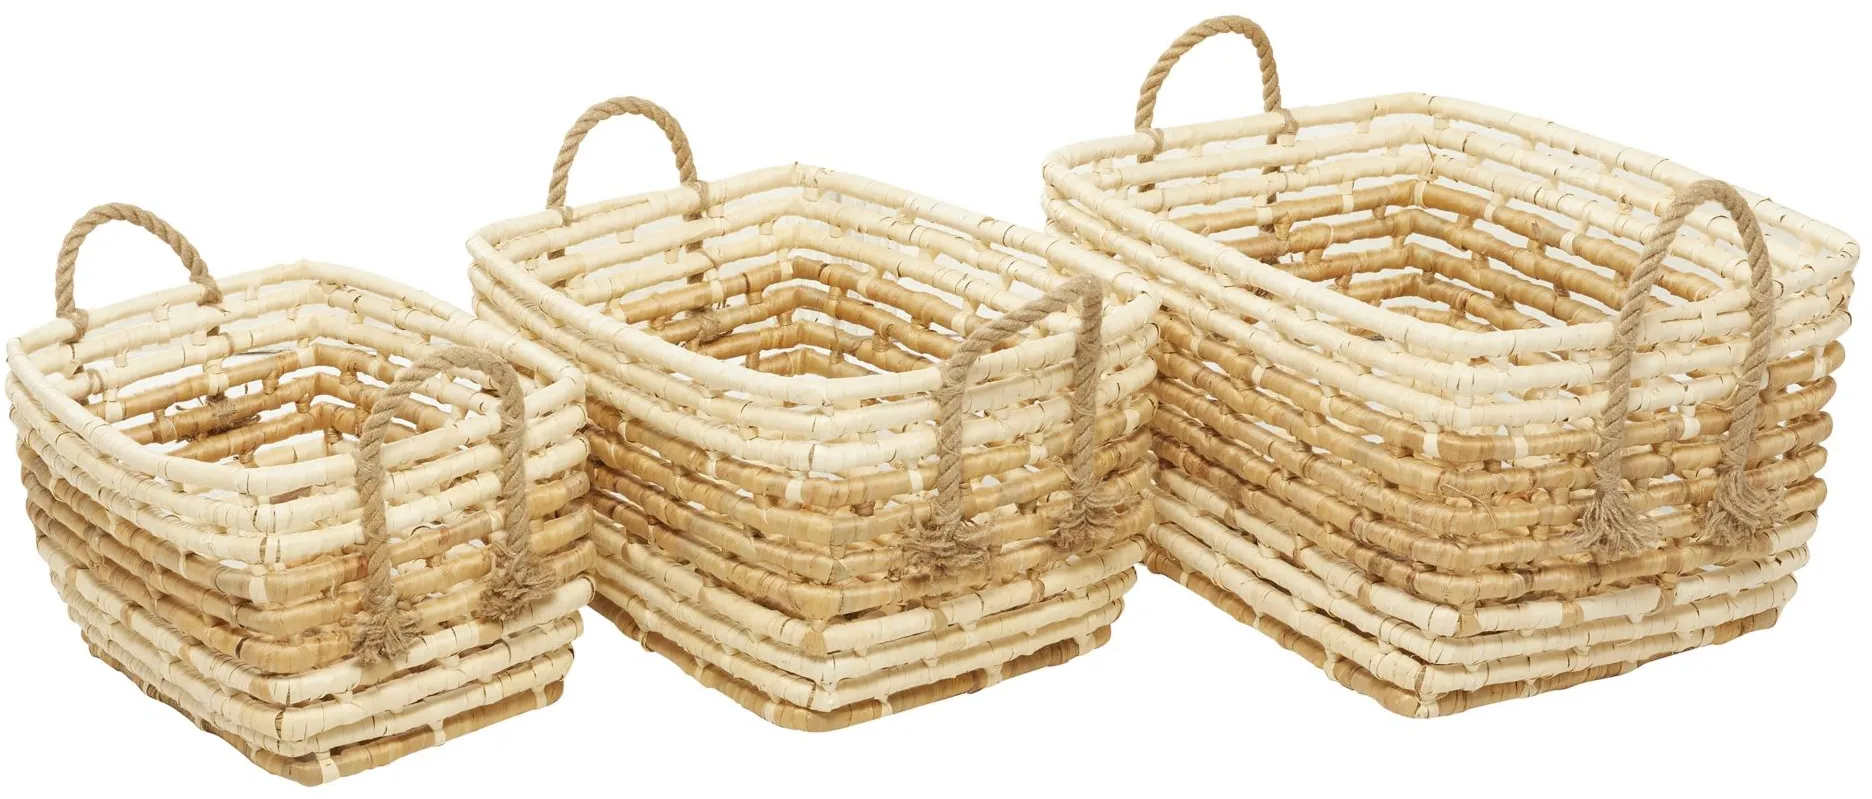 Ivy Collection Seagrass Storage Basket - Set of 3 in Brown by UMA Enterprises